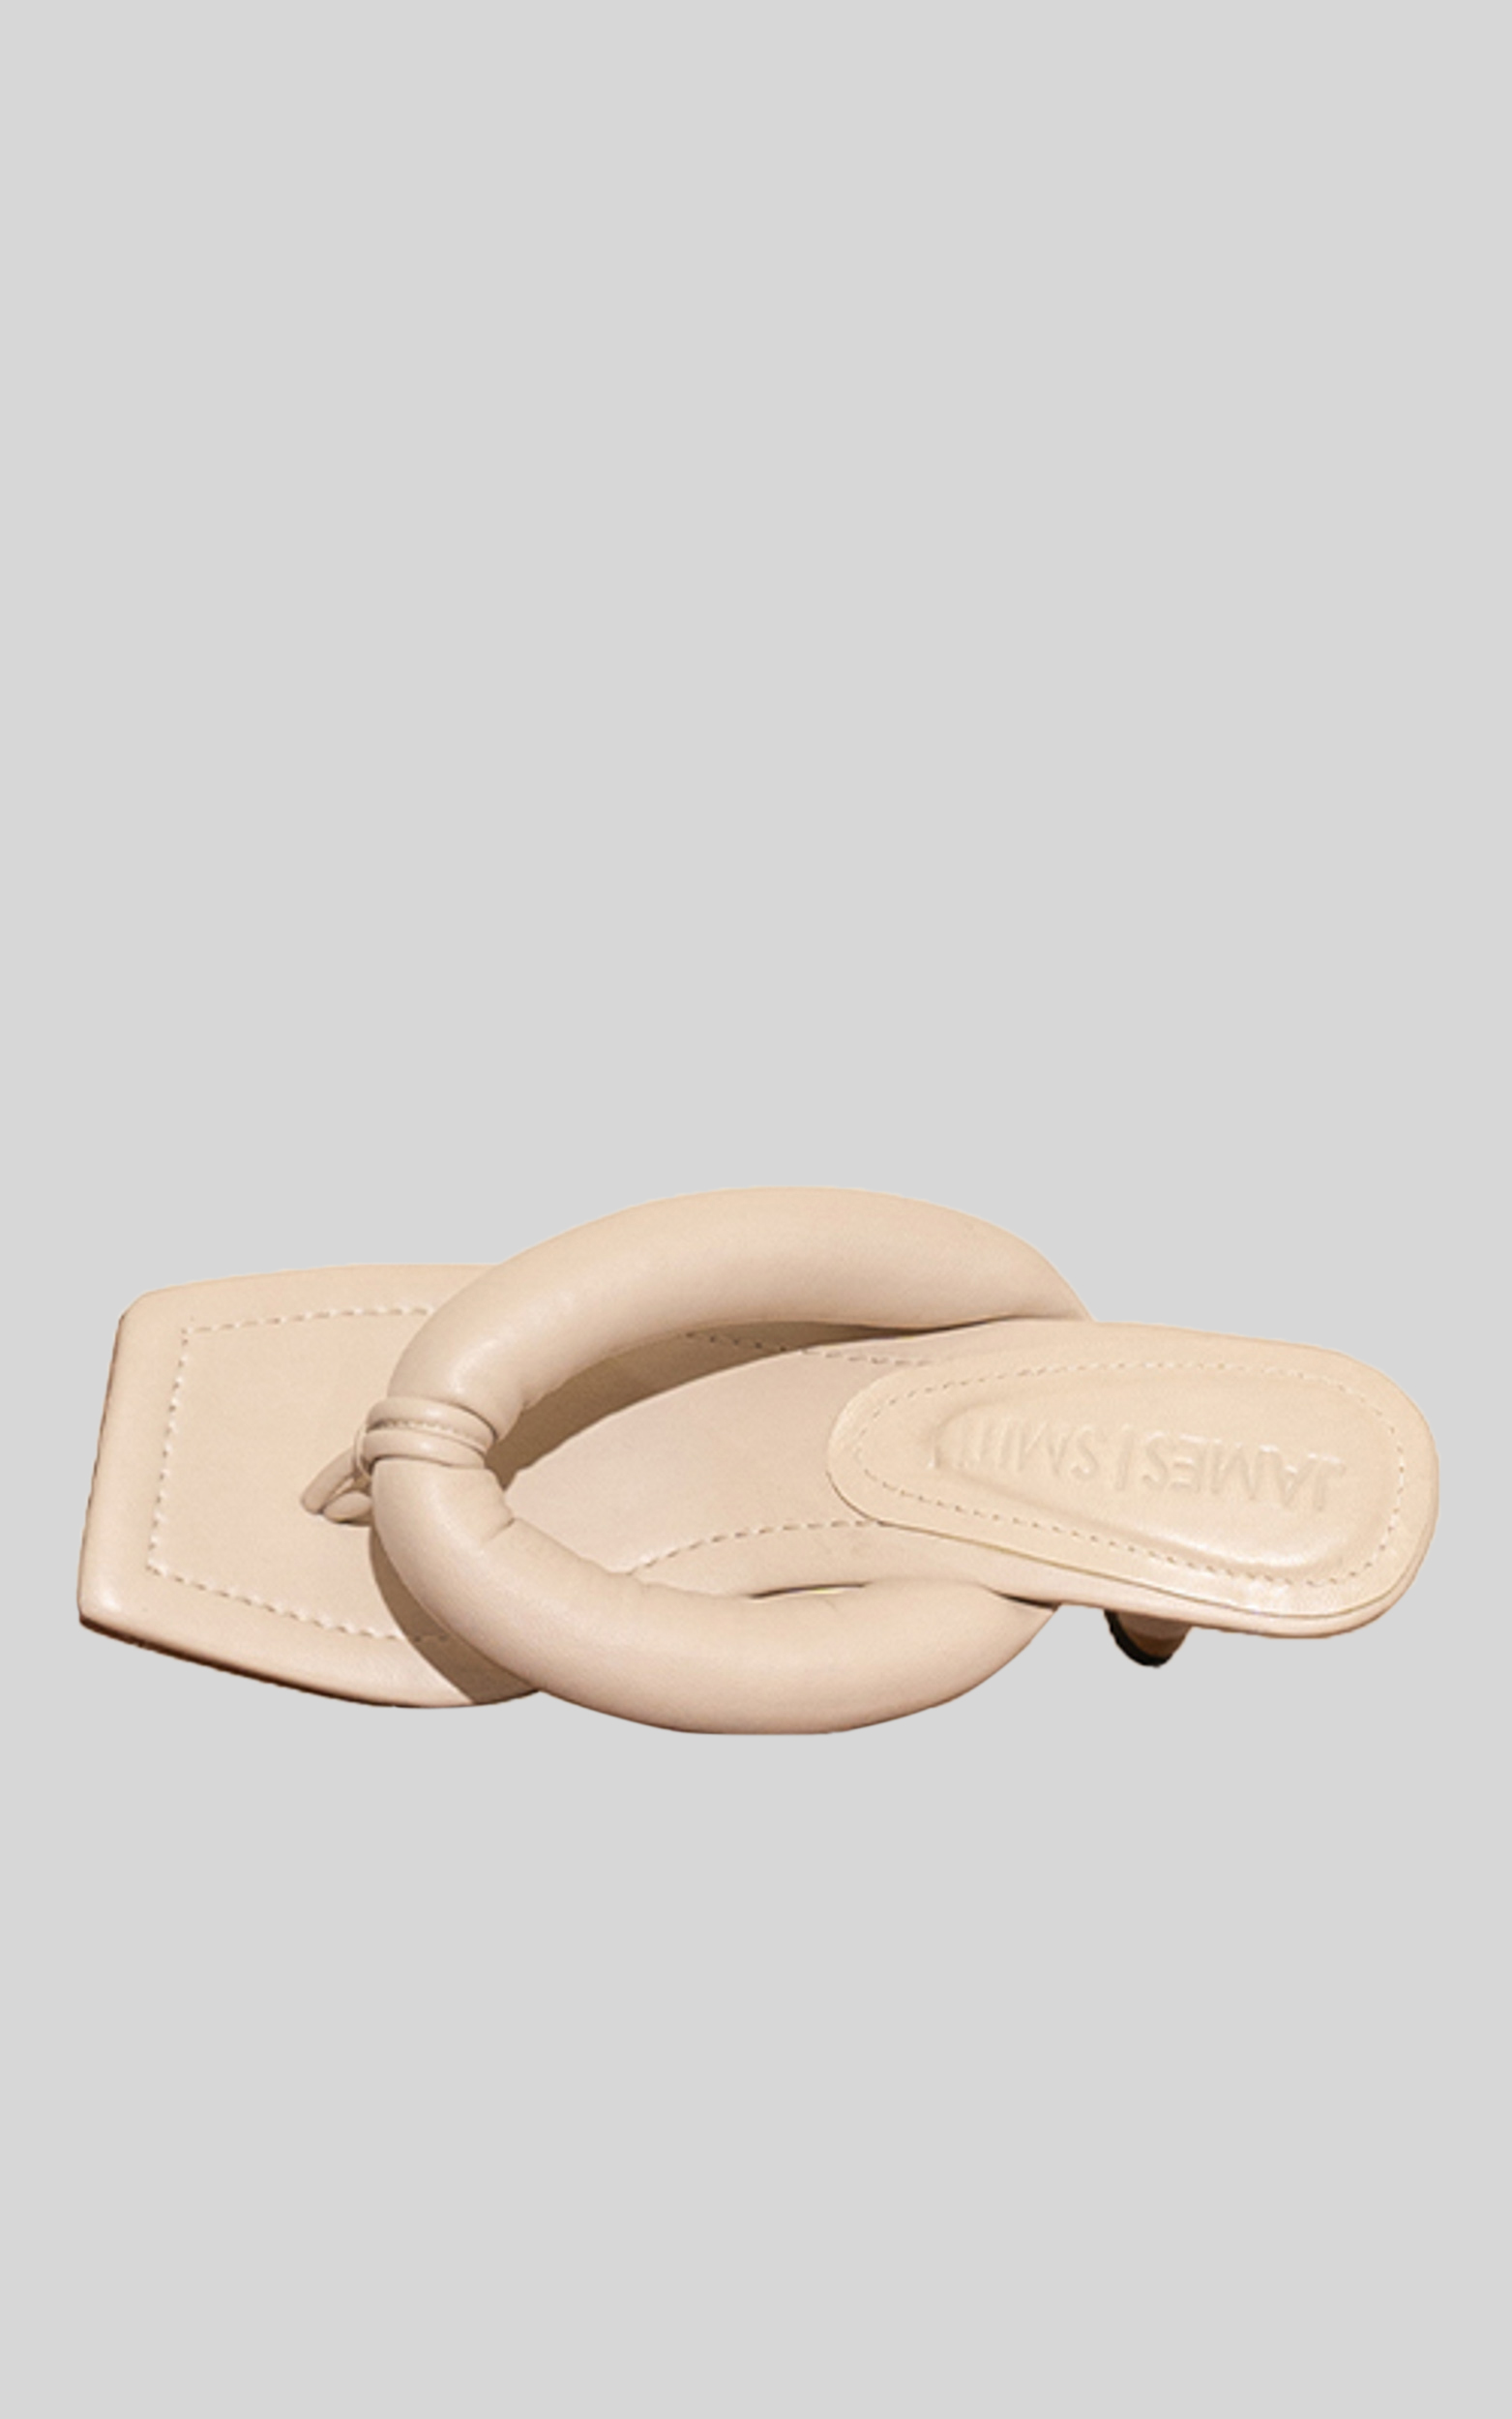 James Smith - Florence Sandal in Nude - 05, BRN4, hi-res image number null